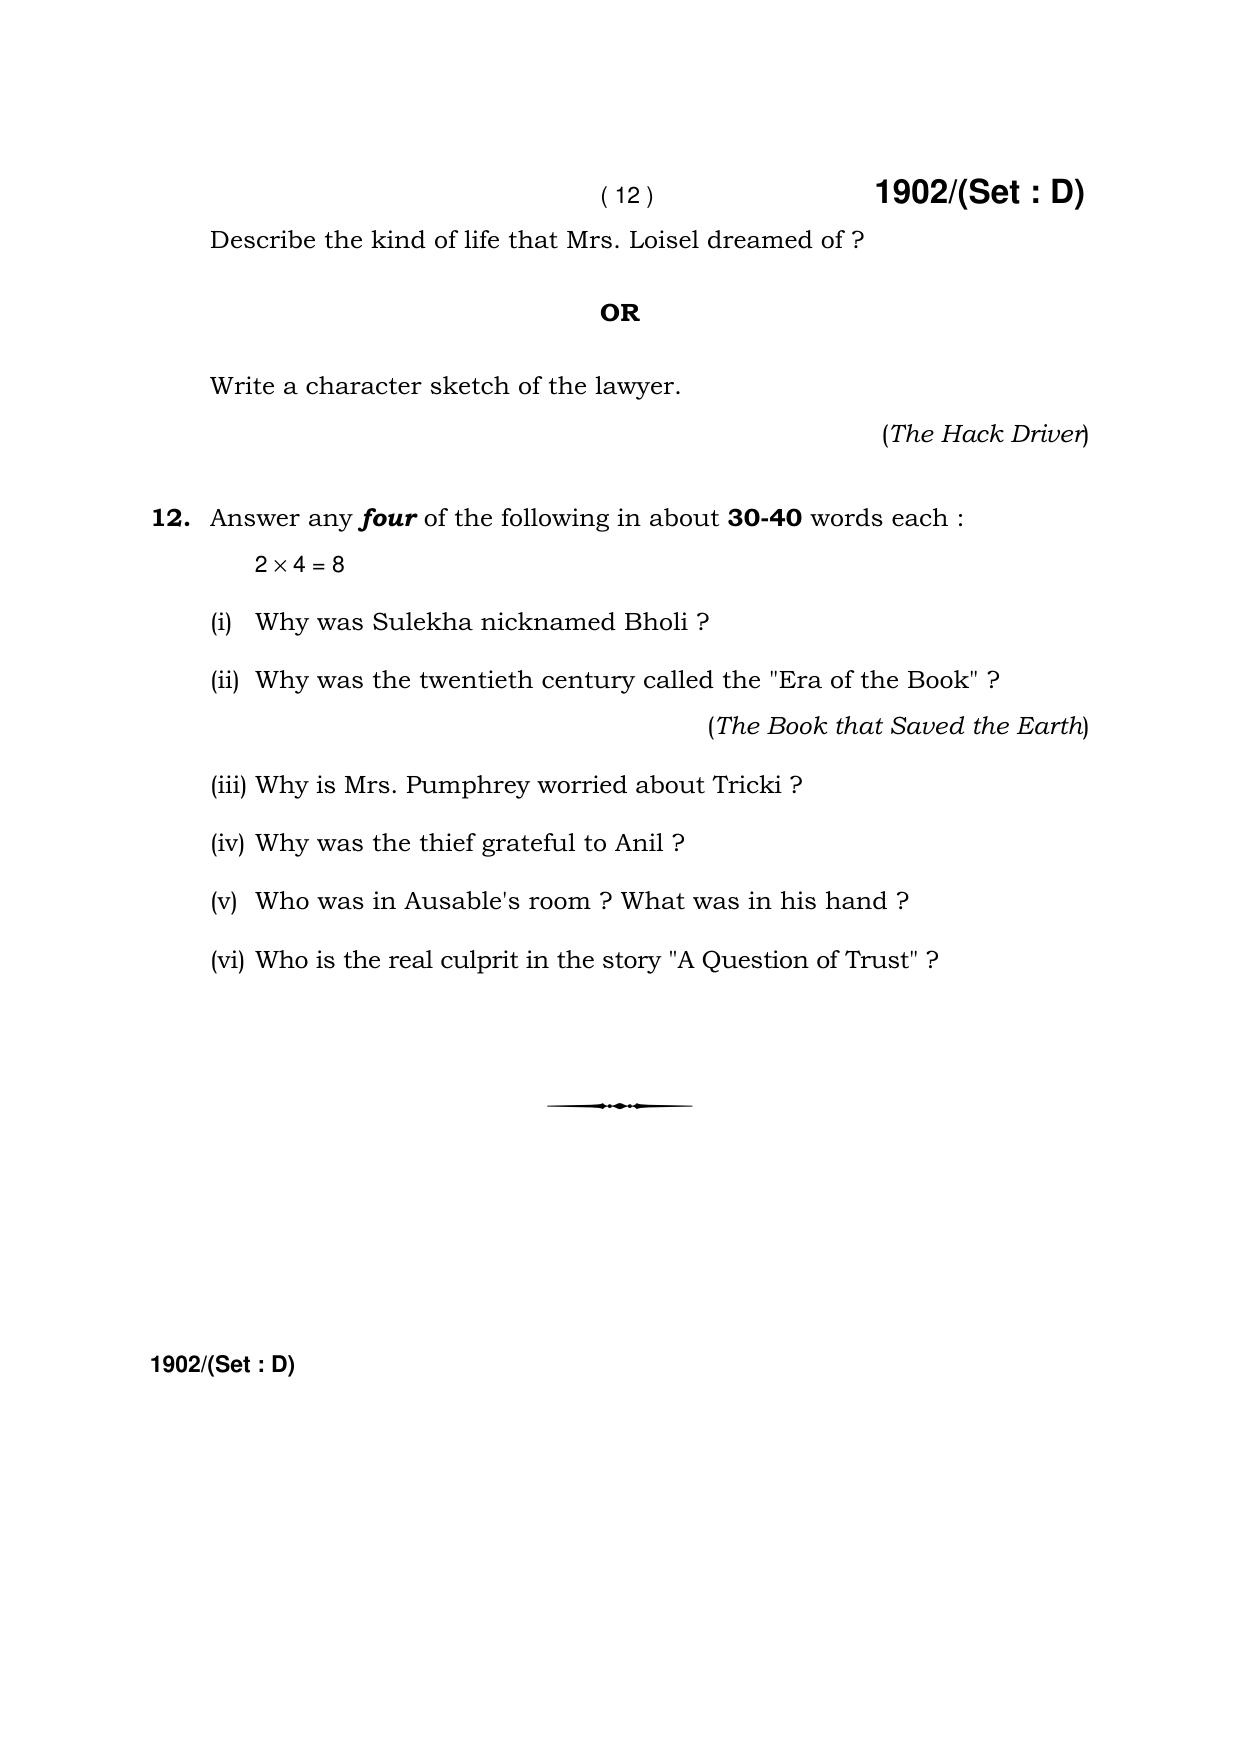 Haryana Board HBSE Class 10 English -D 2017 Question Paper - Page 12